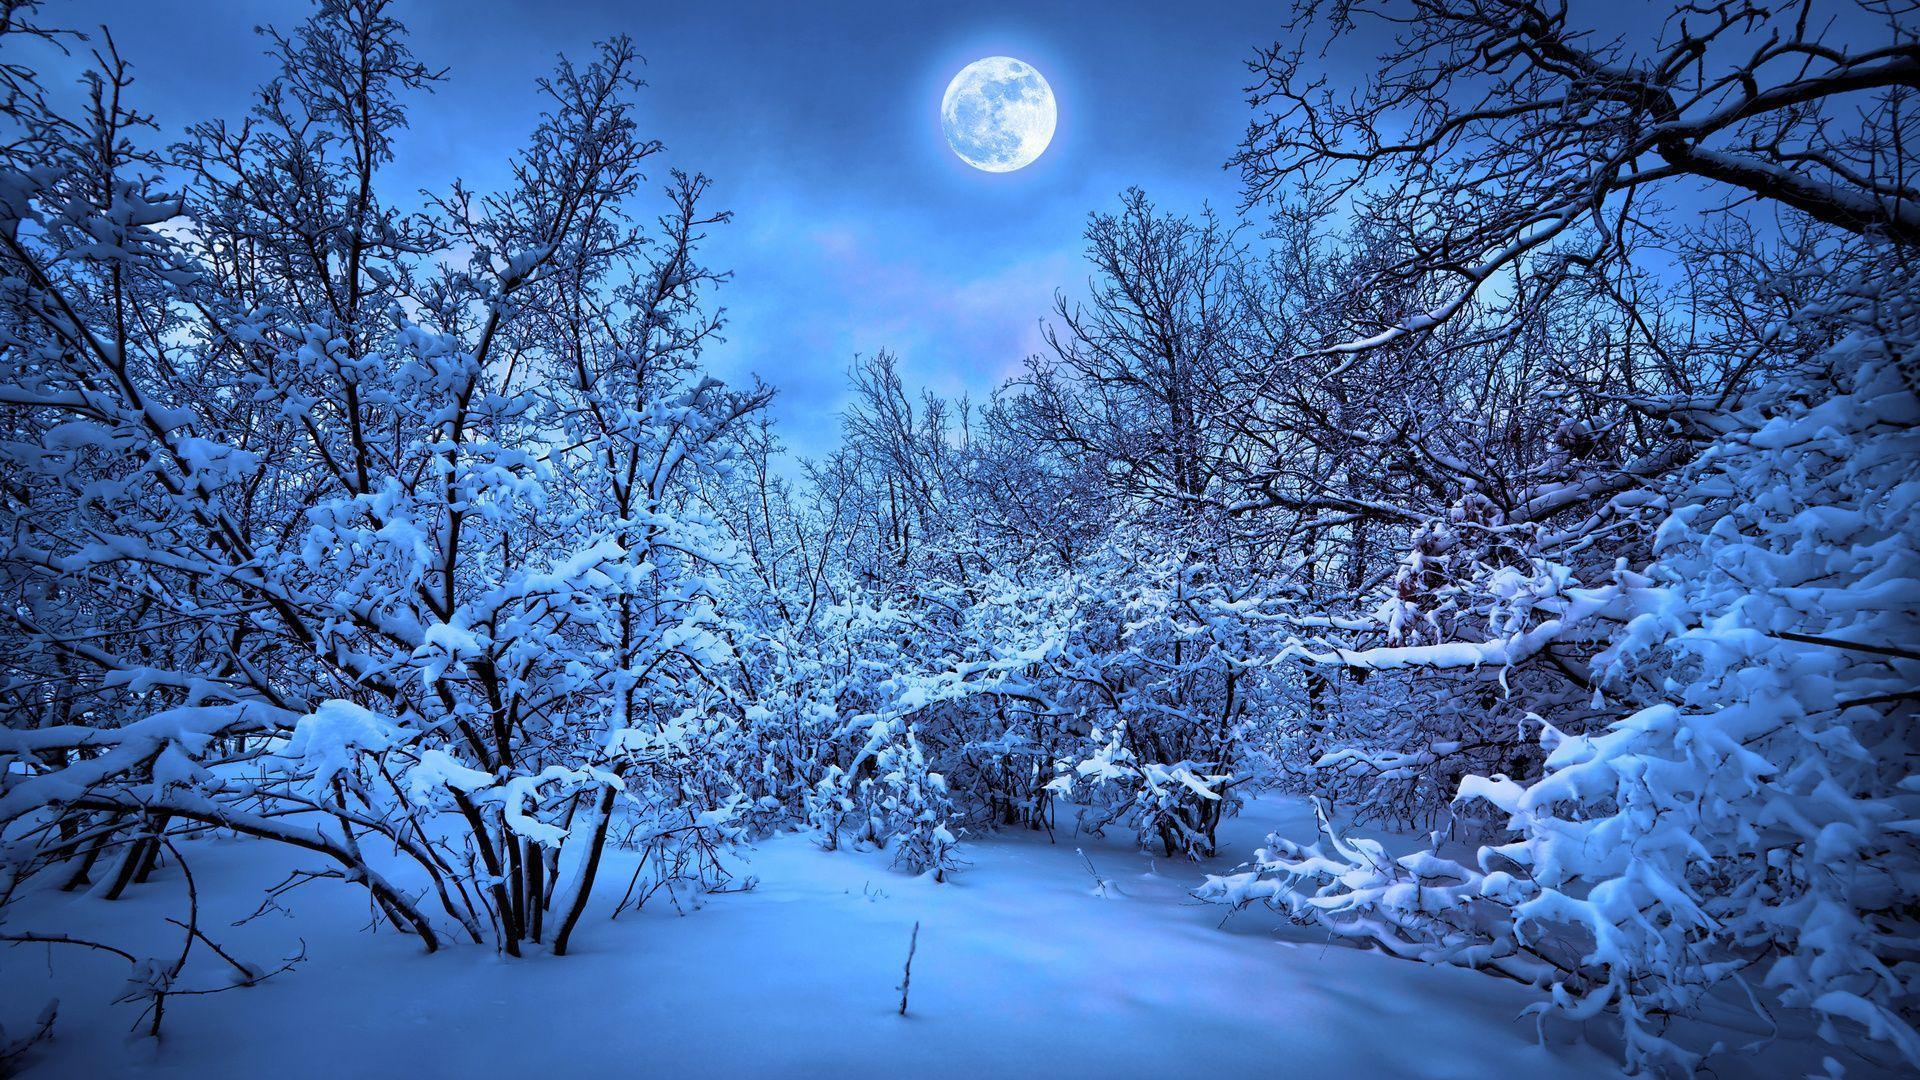 Snowy Night Forest Wallpaper. home. Night picture